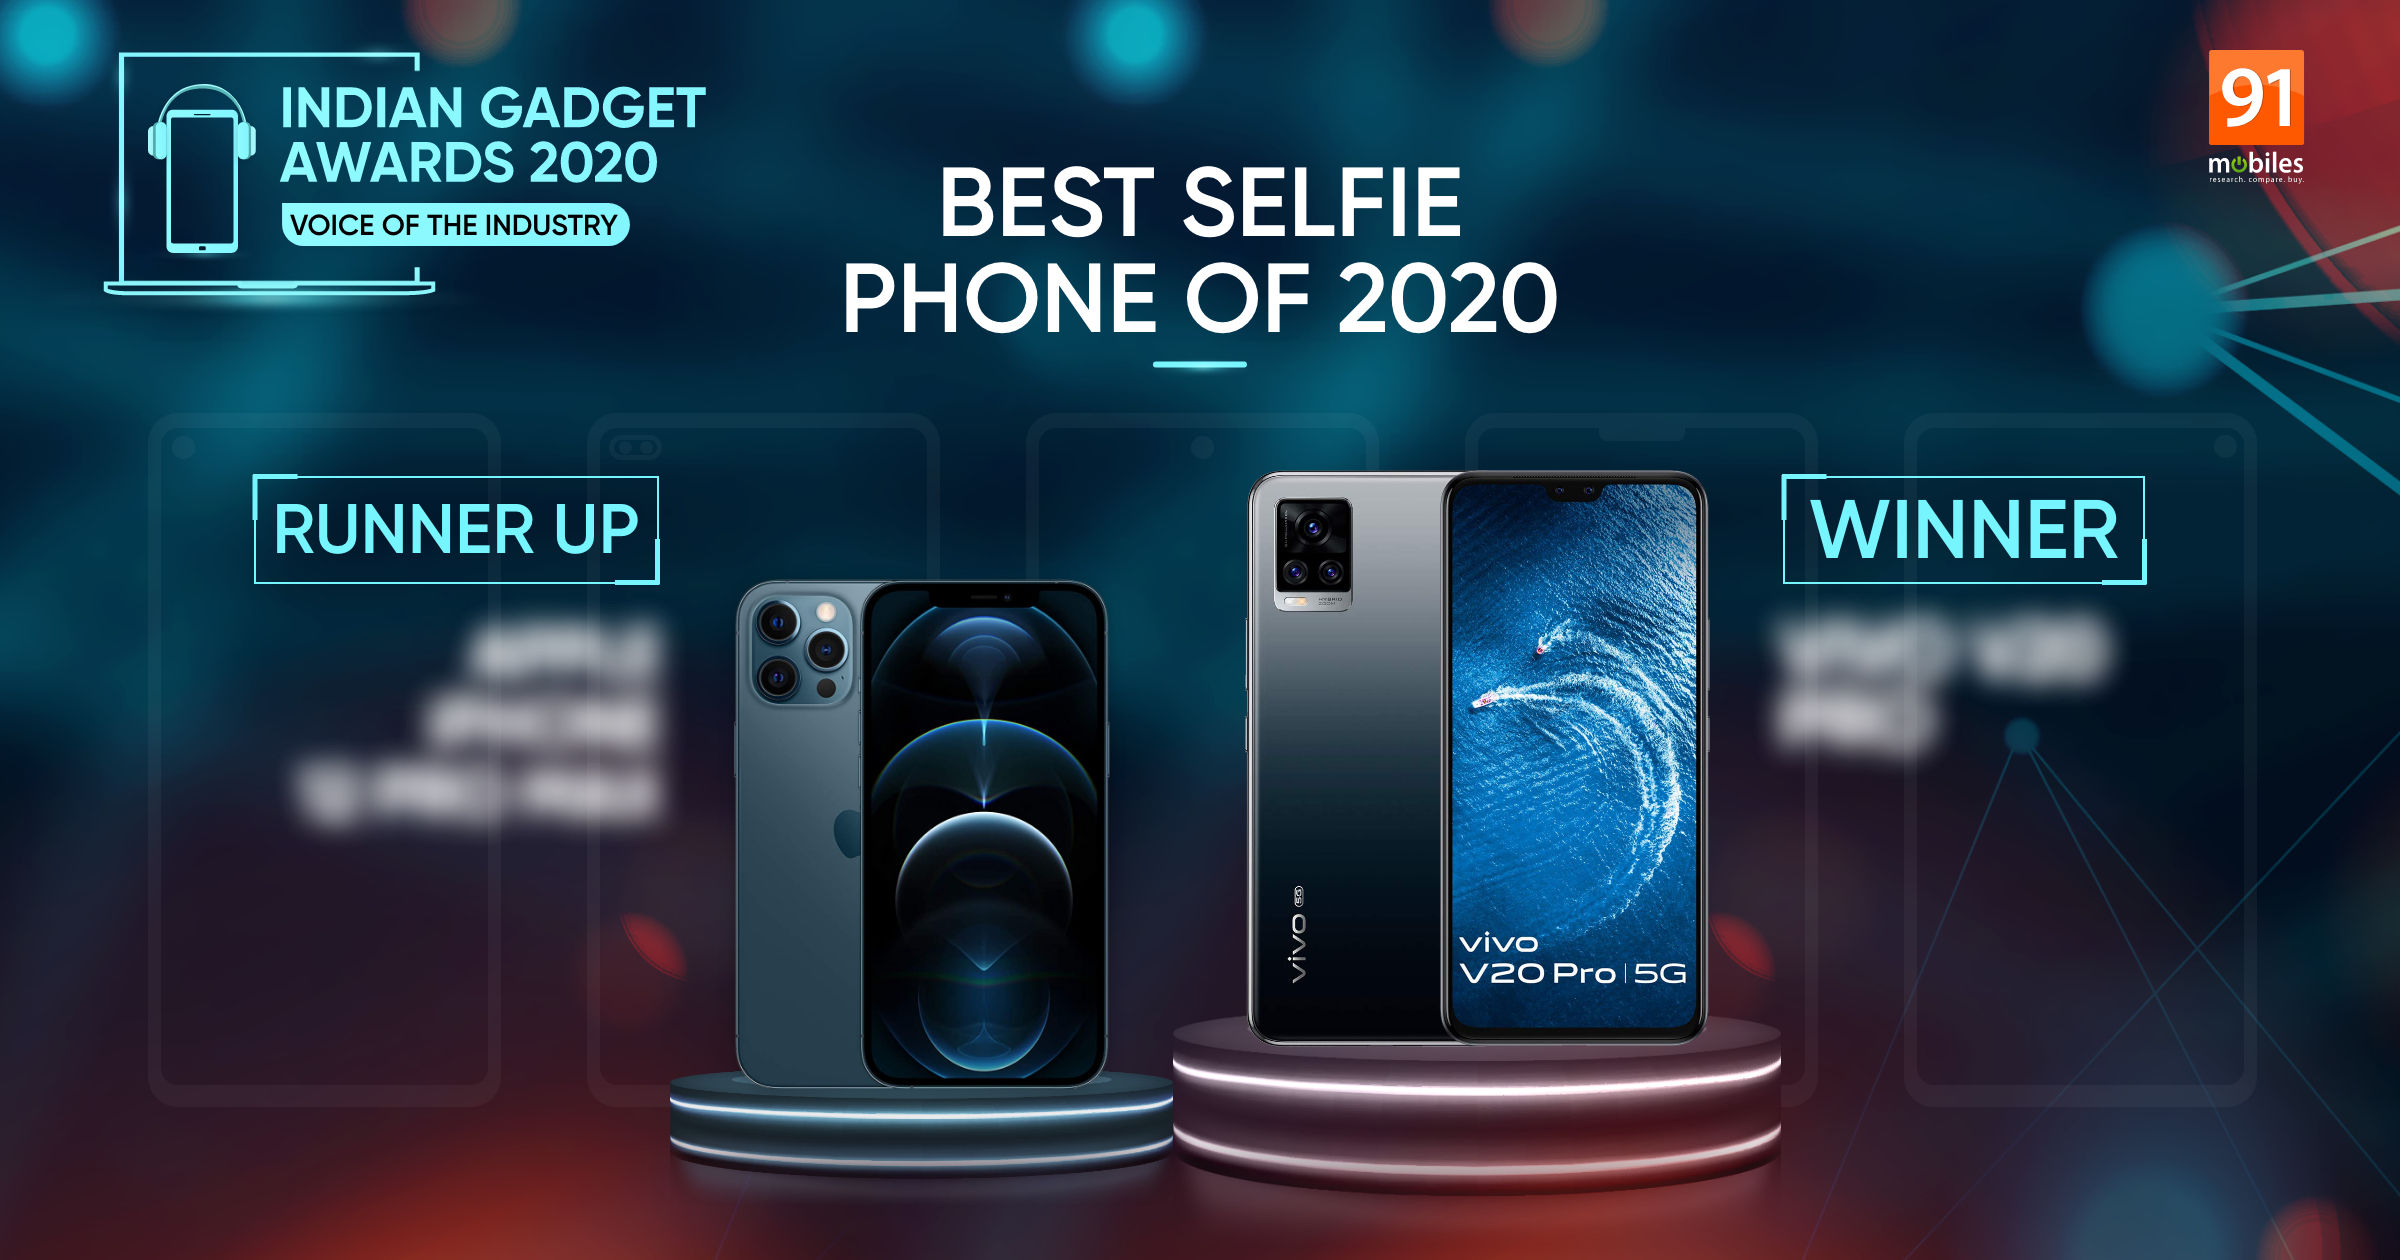 Can Vivo V20 Pro beat iPhone 12 Pro Max for the Best Selfie Phone of 2020 title at Indian Gadget Awards?